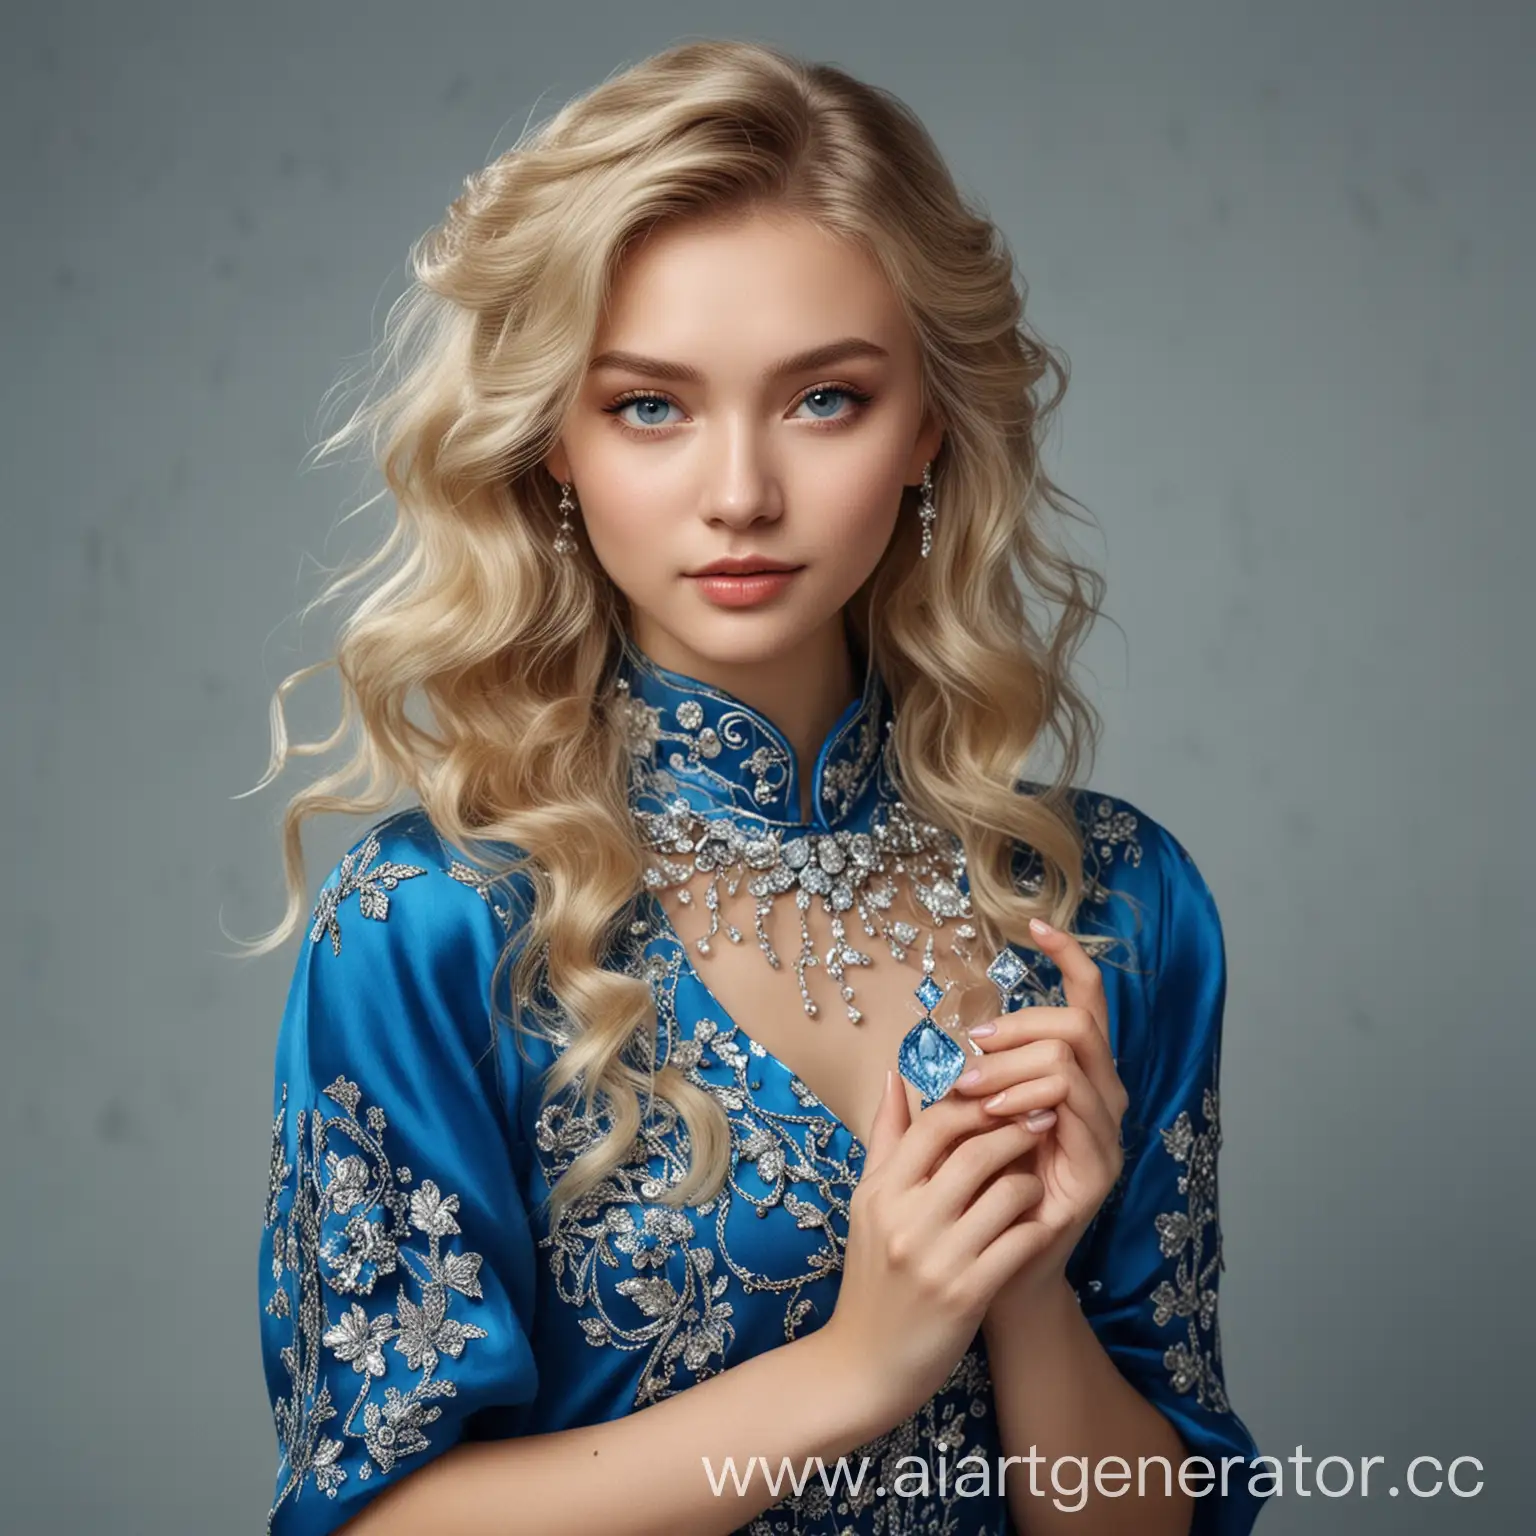 Blonde-Russian-Girl-in-Blue-Chinese-Dress-Holding-Diamonds